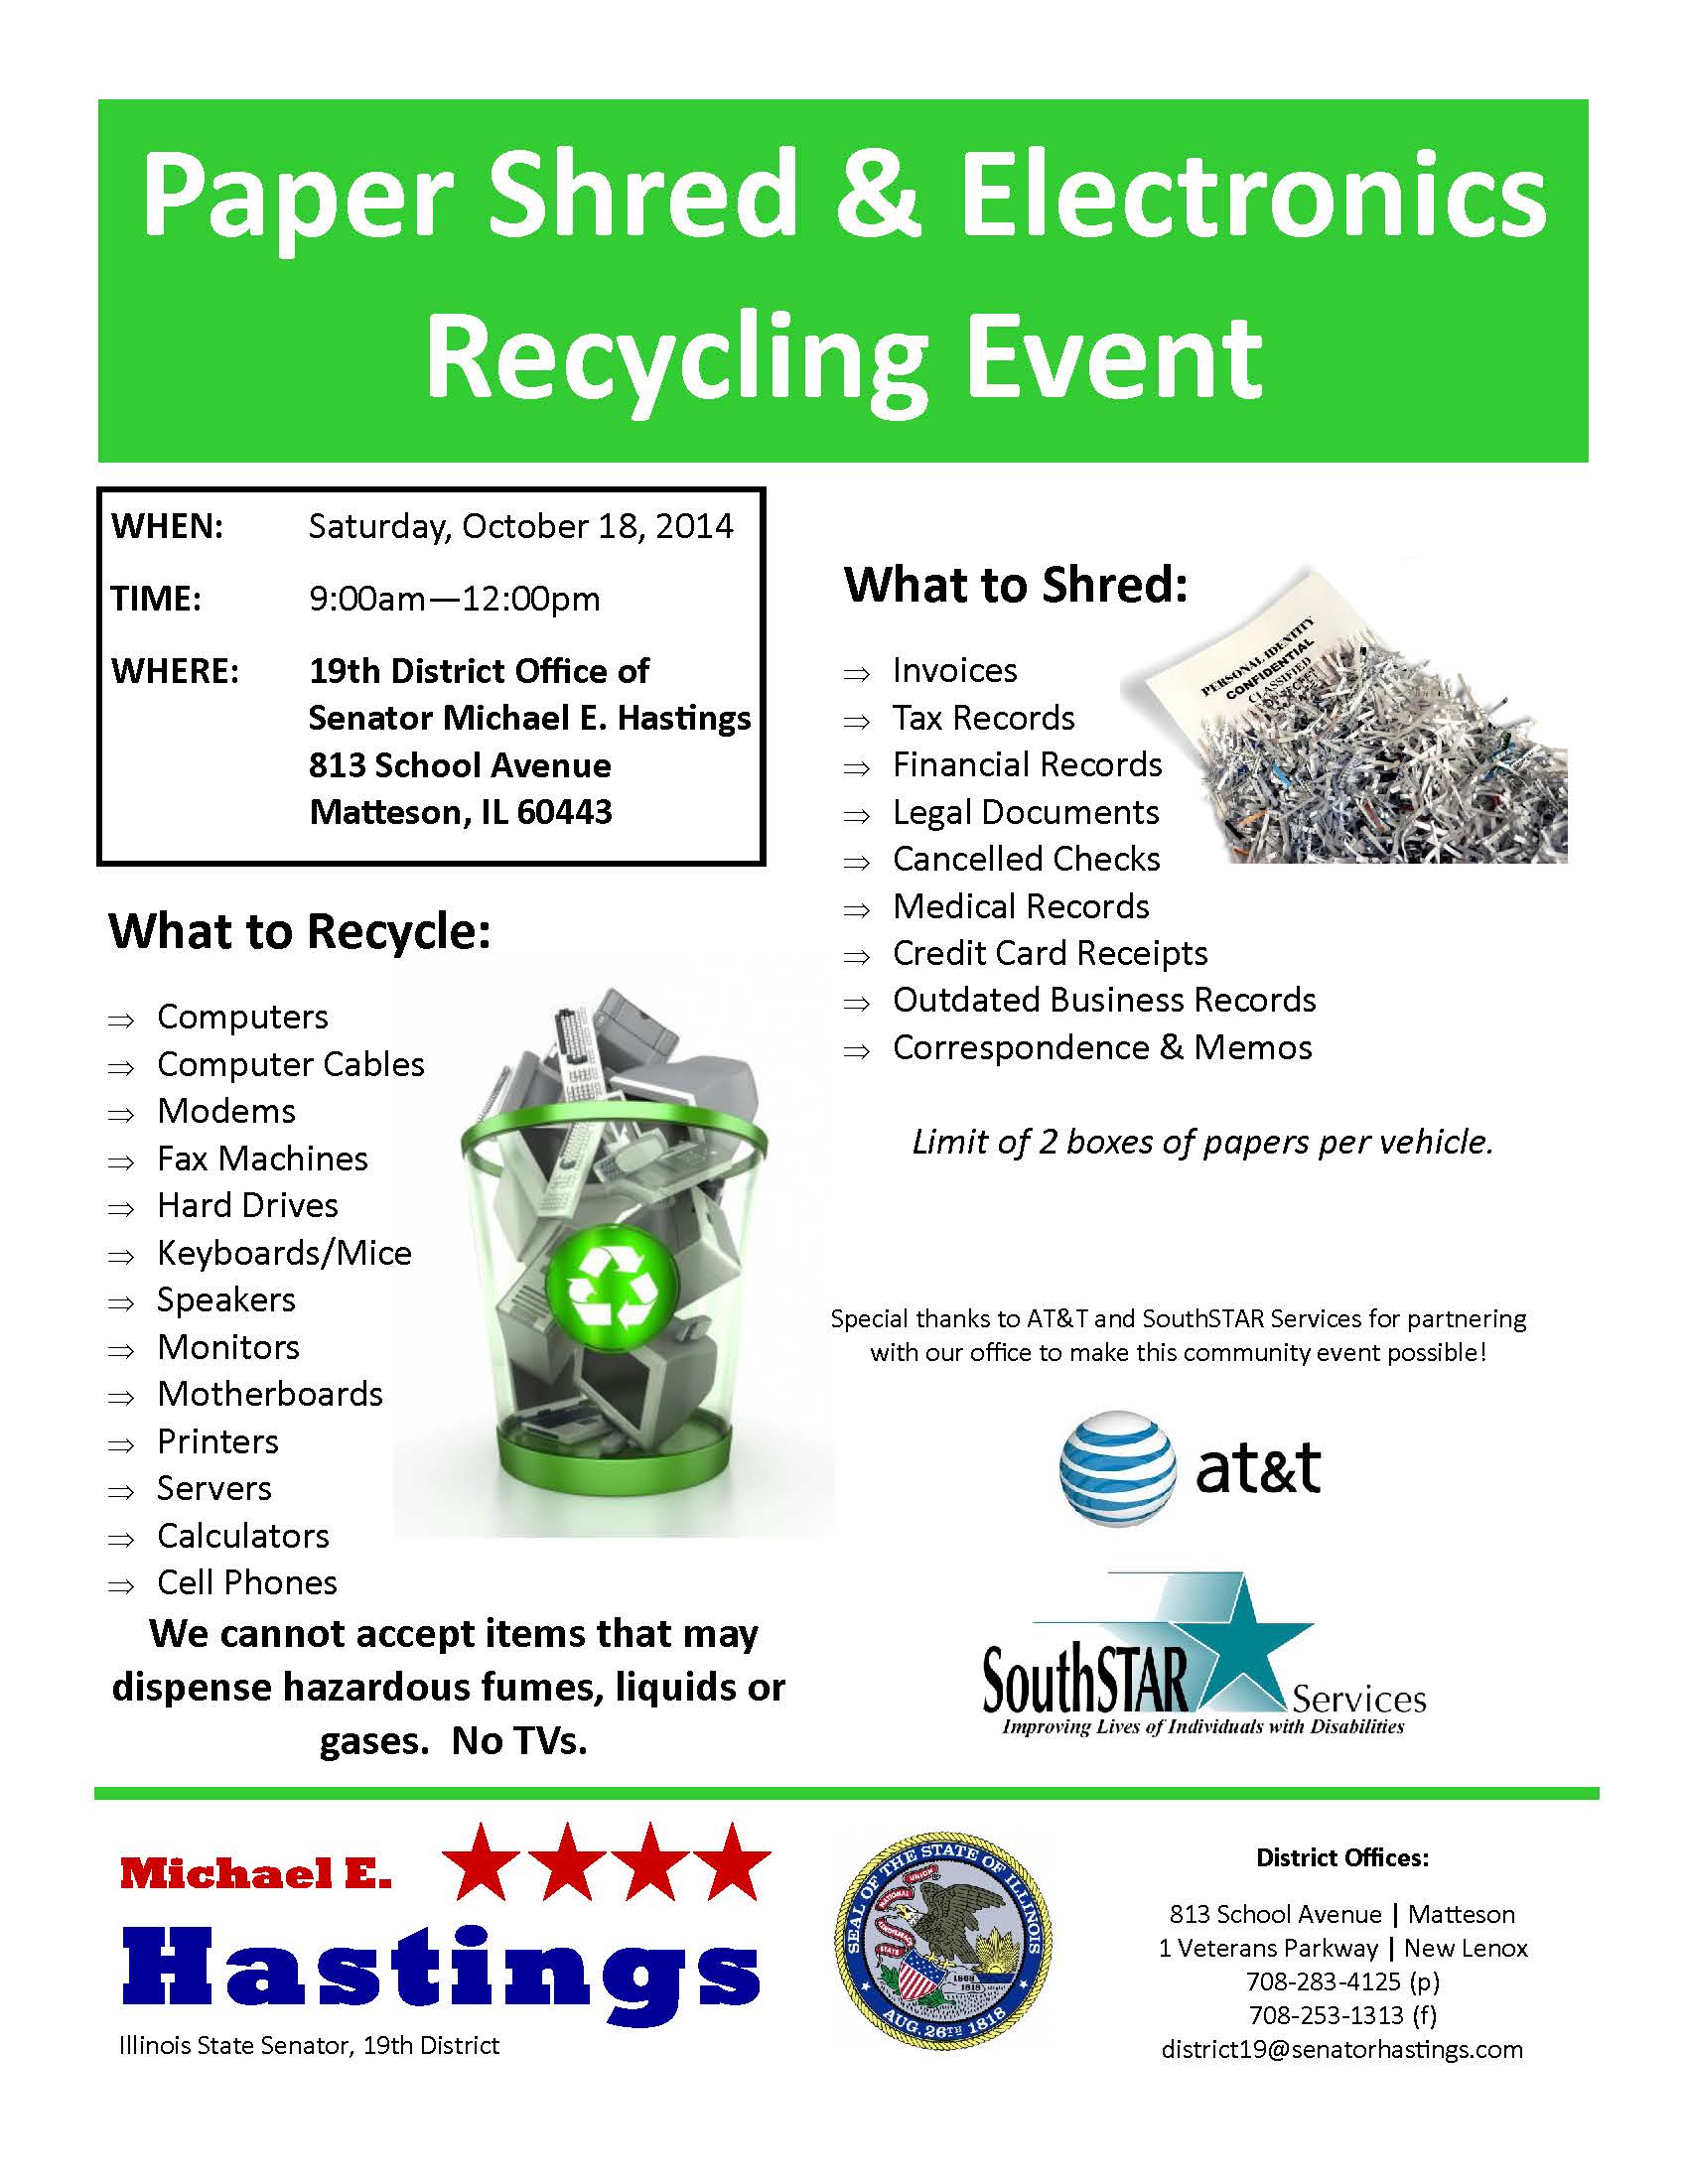 Paper Shred & Electronics Recycling Event